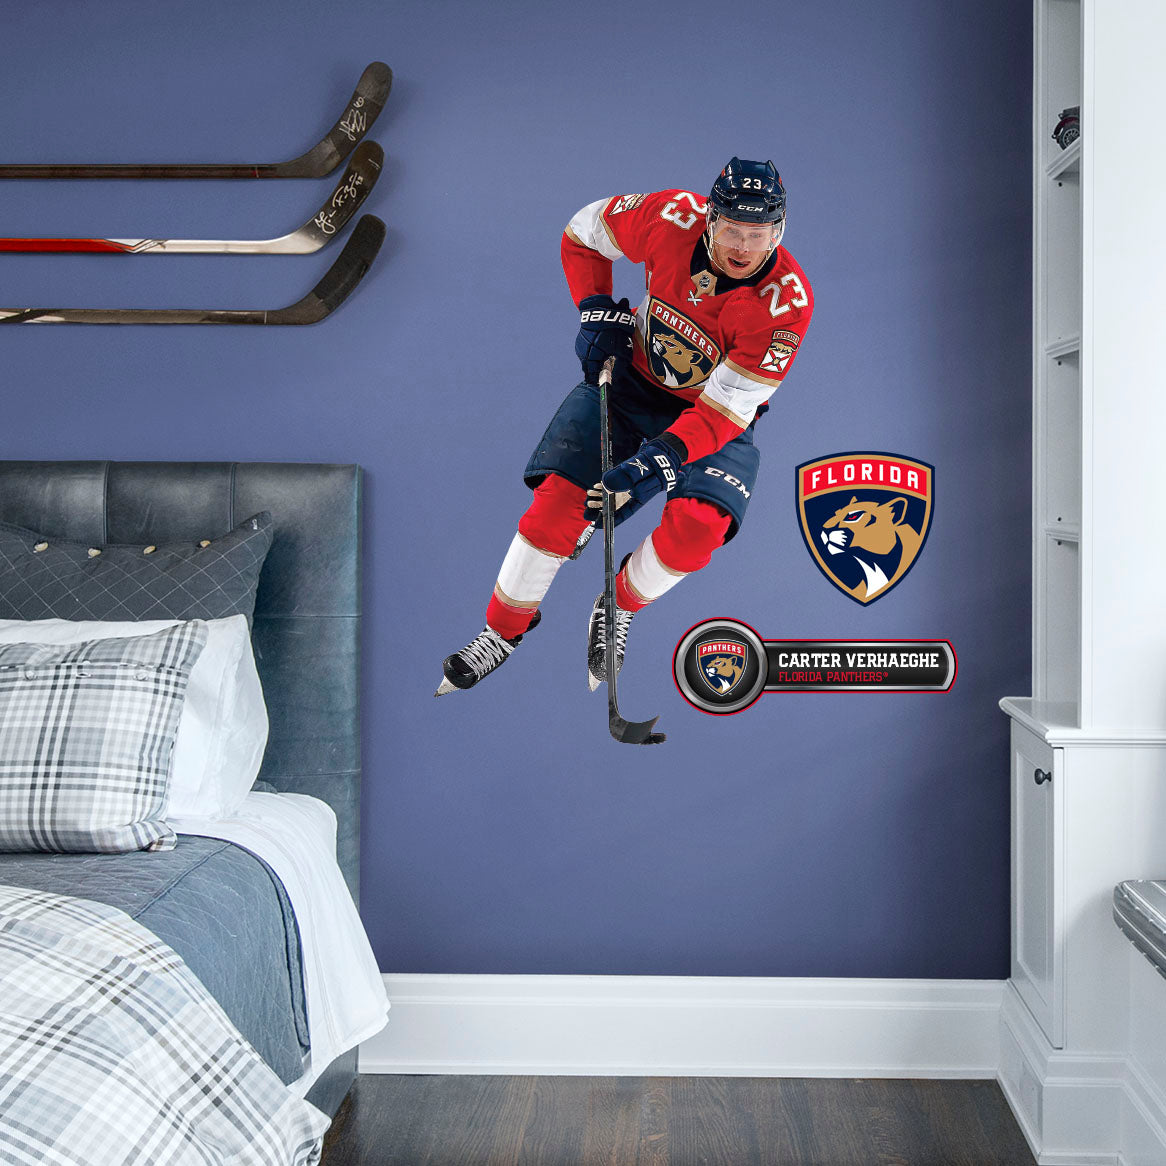 Florida Panthers: Carter Verhaeghe - Officially Licensed NHL Removable Adhesive Decal